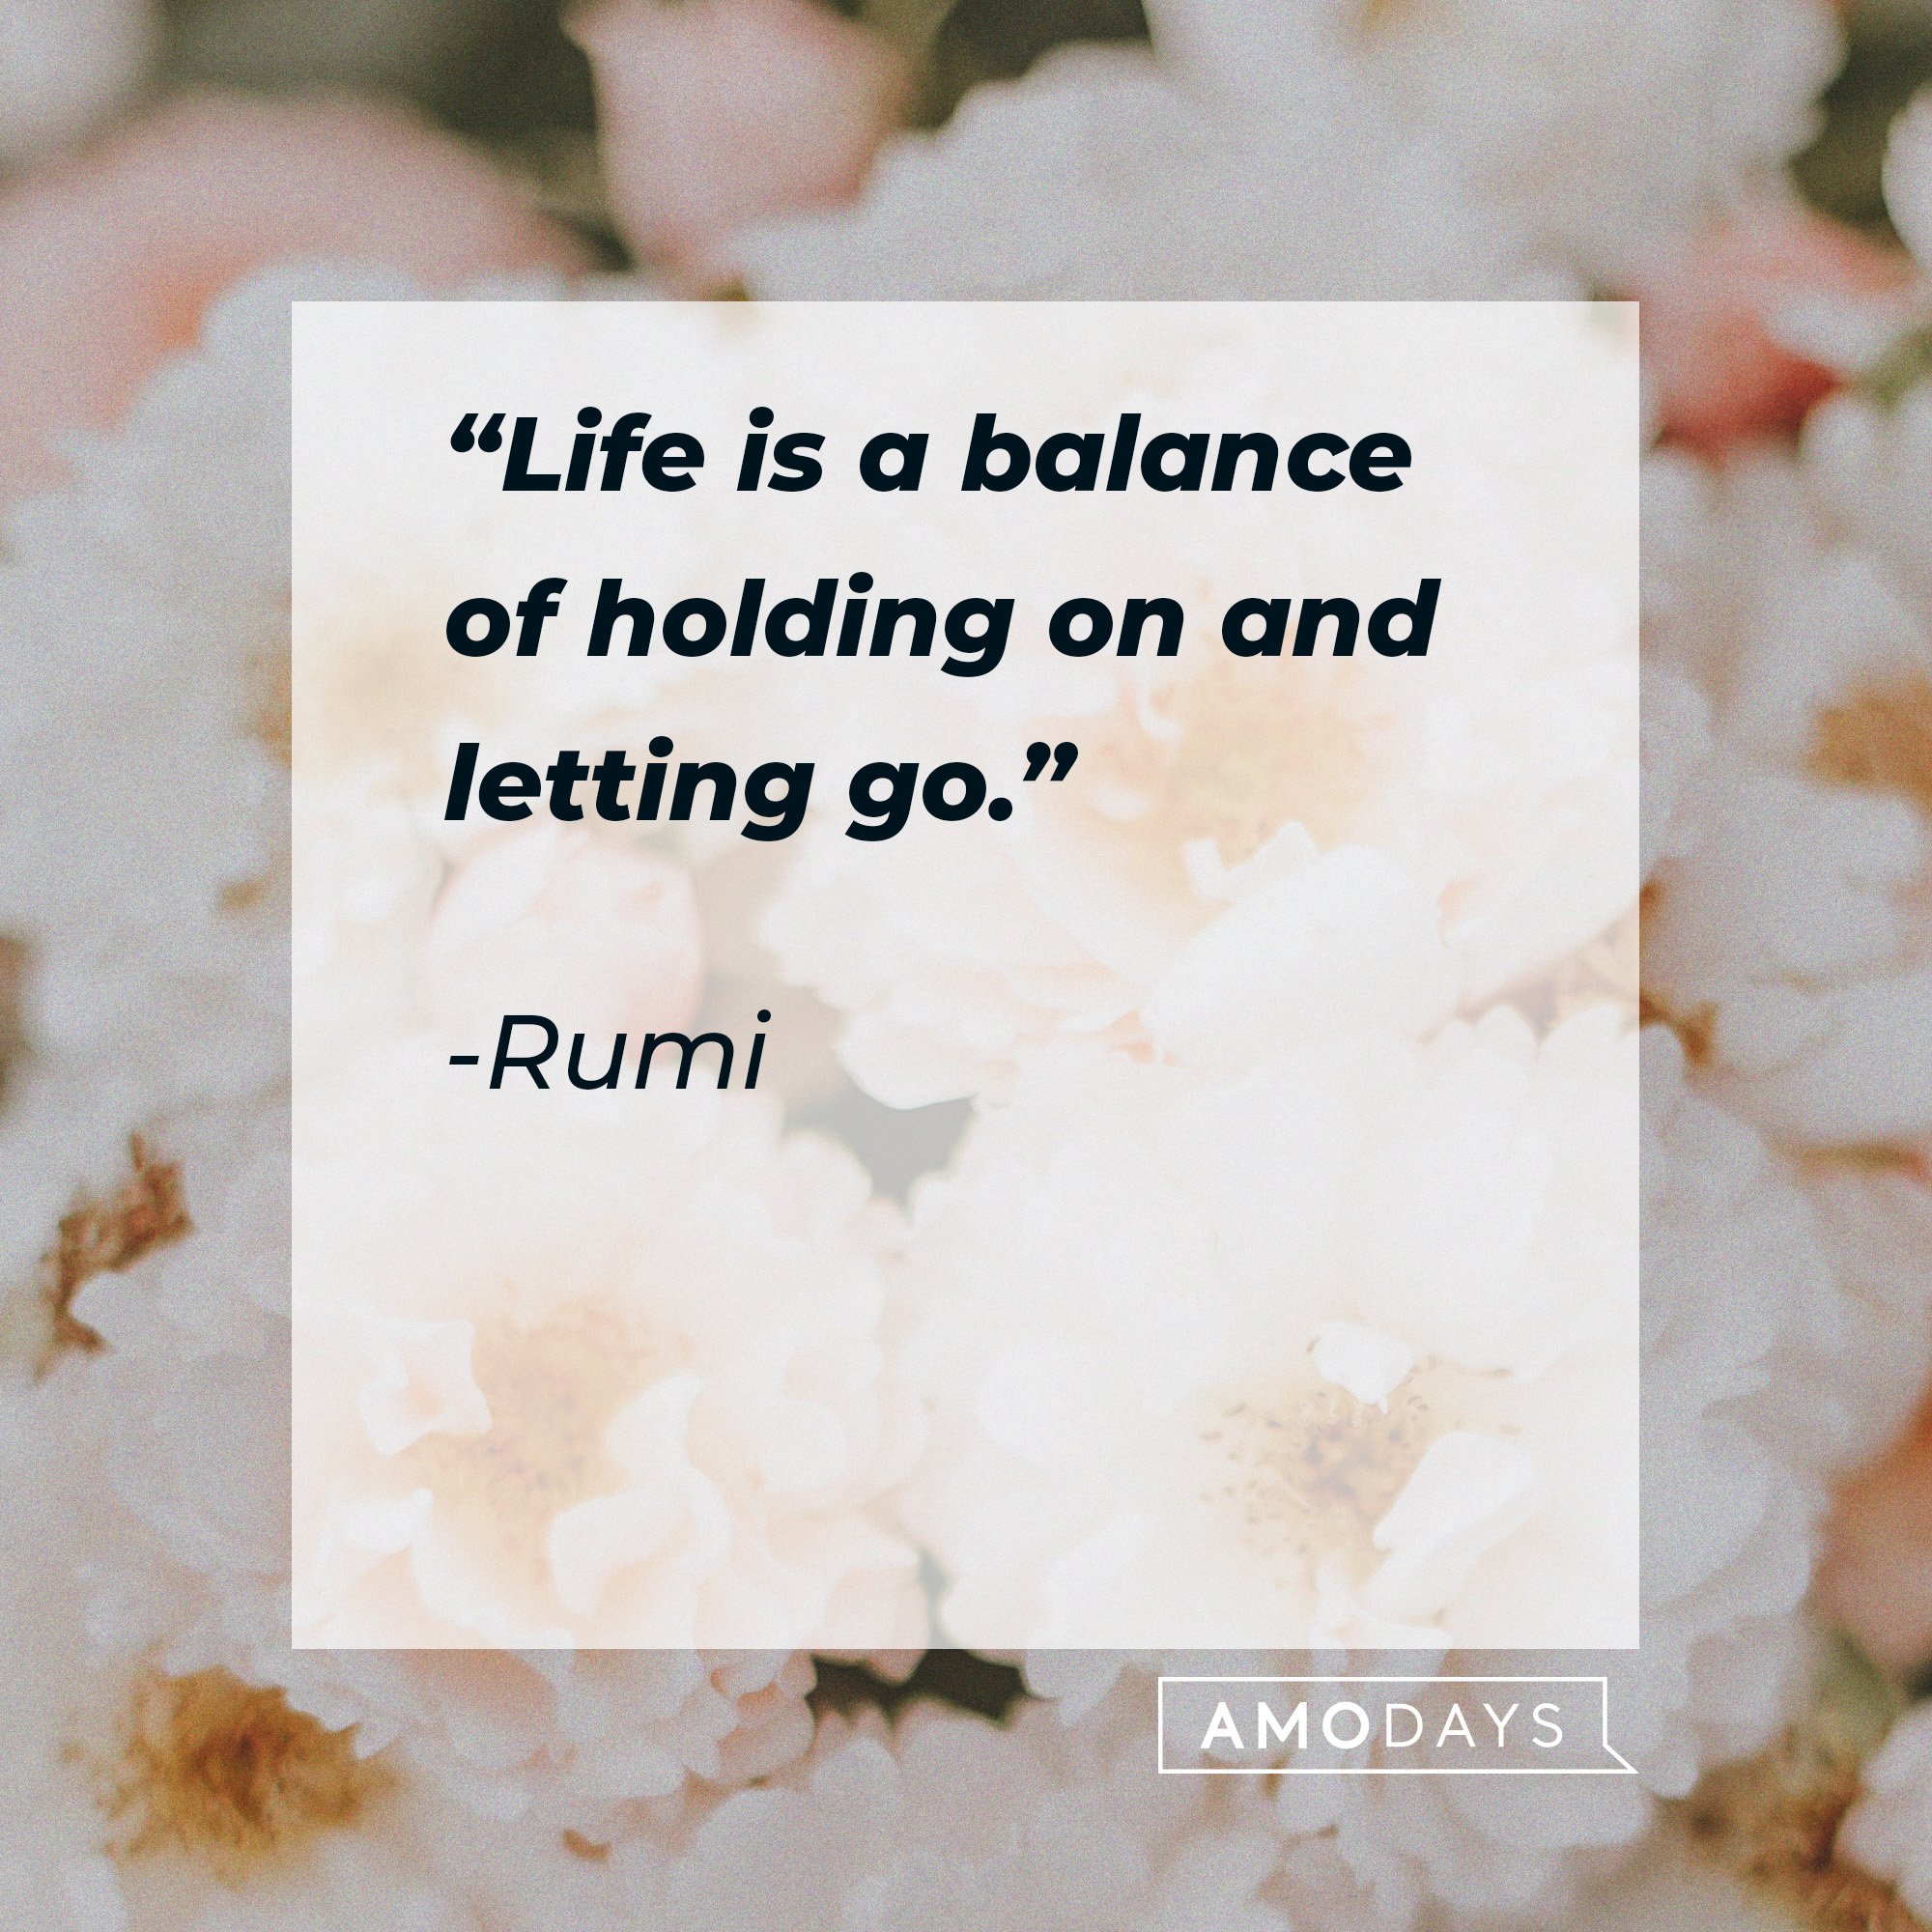 Rumi's quote: “Life is a balance of holding on and letting go.”| Image: AmoDays